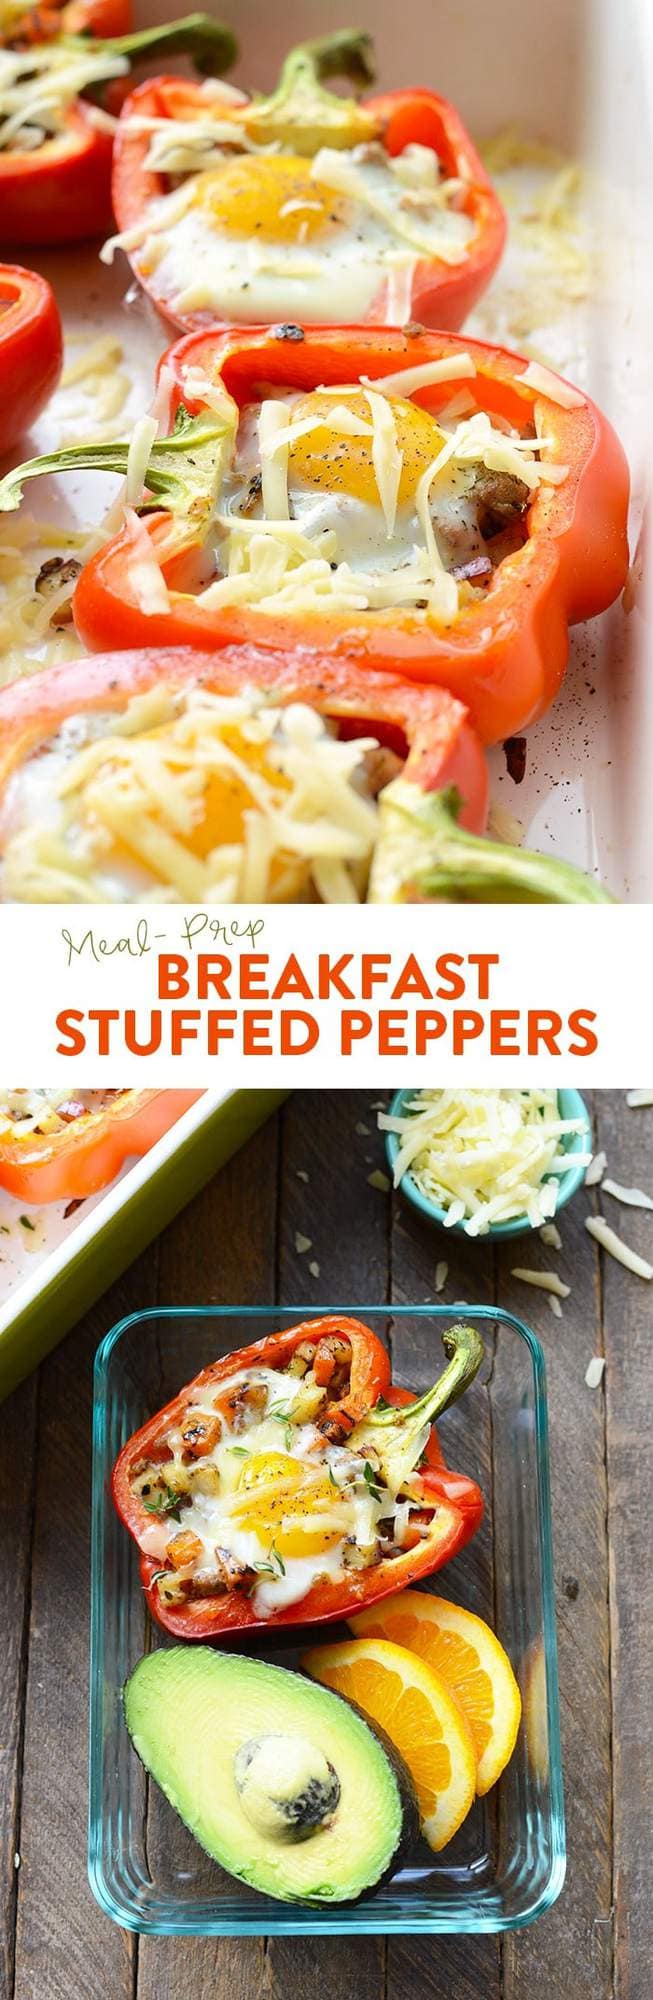 meal-prep-breakfast-stuffed-peppers-collage